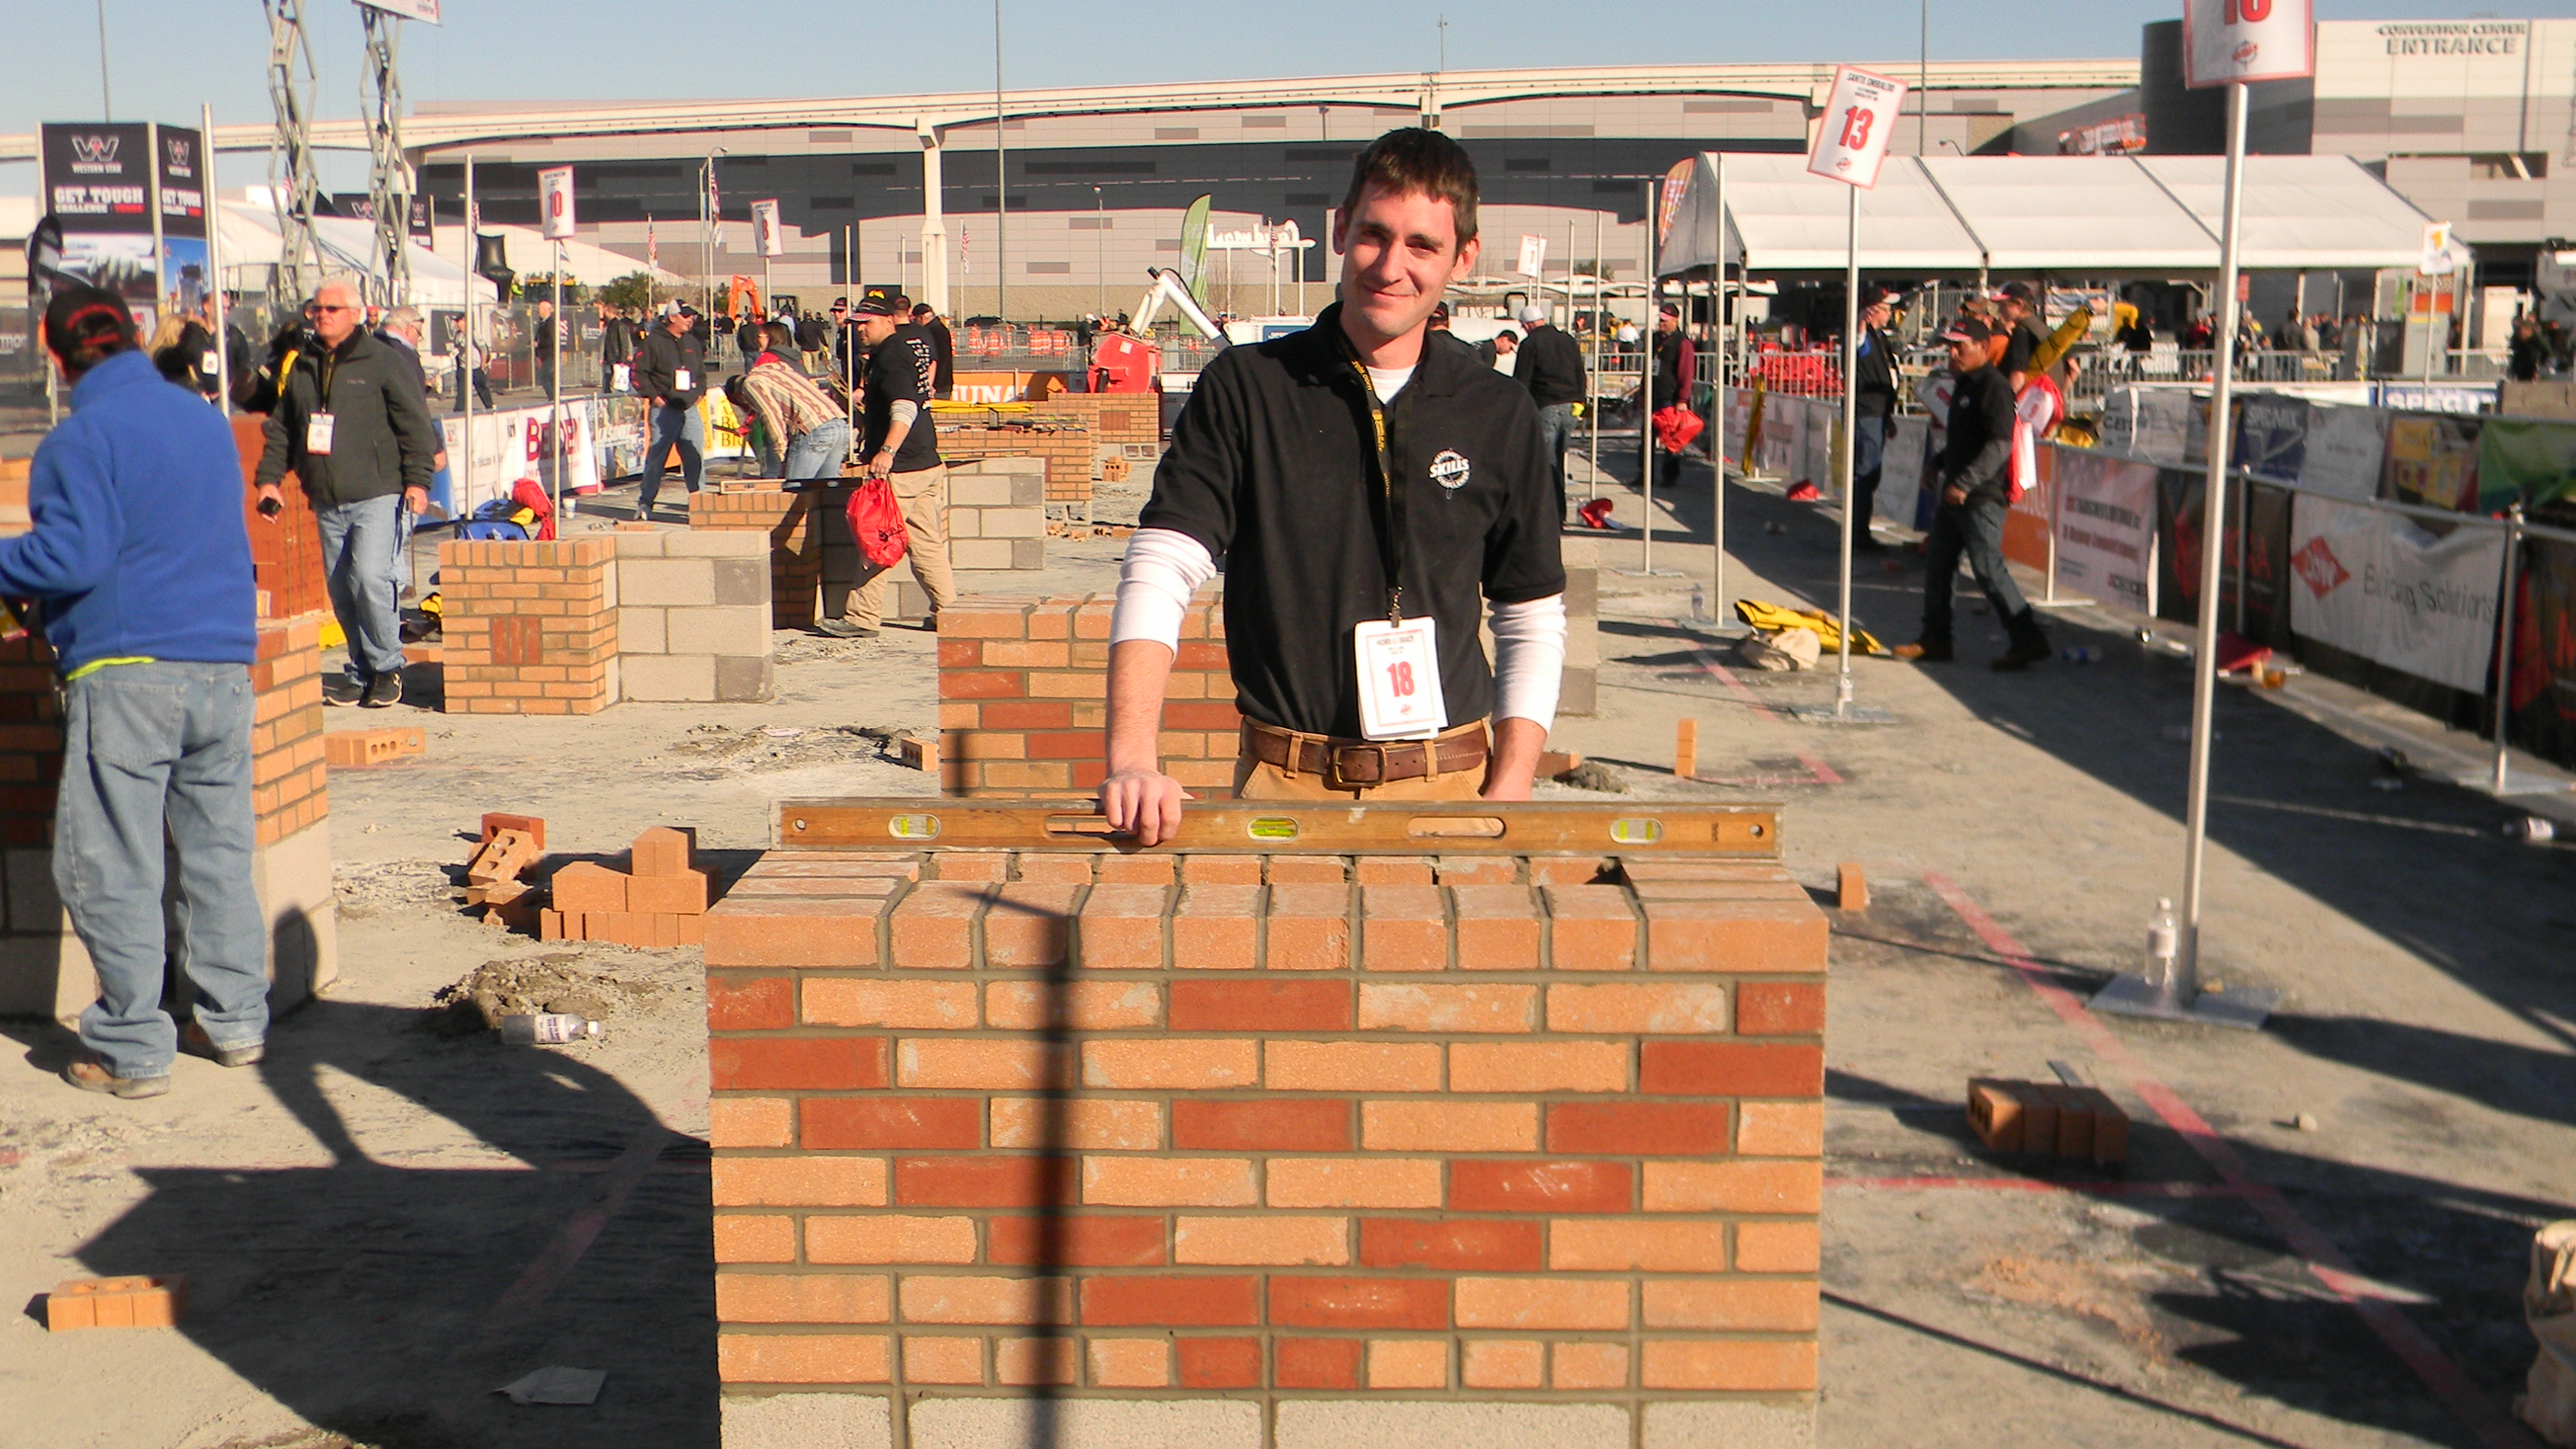 Nick Bracy stands with a hand on the short brick wall that he layed during the competition.